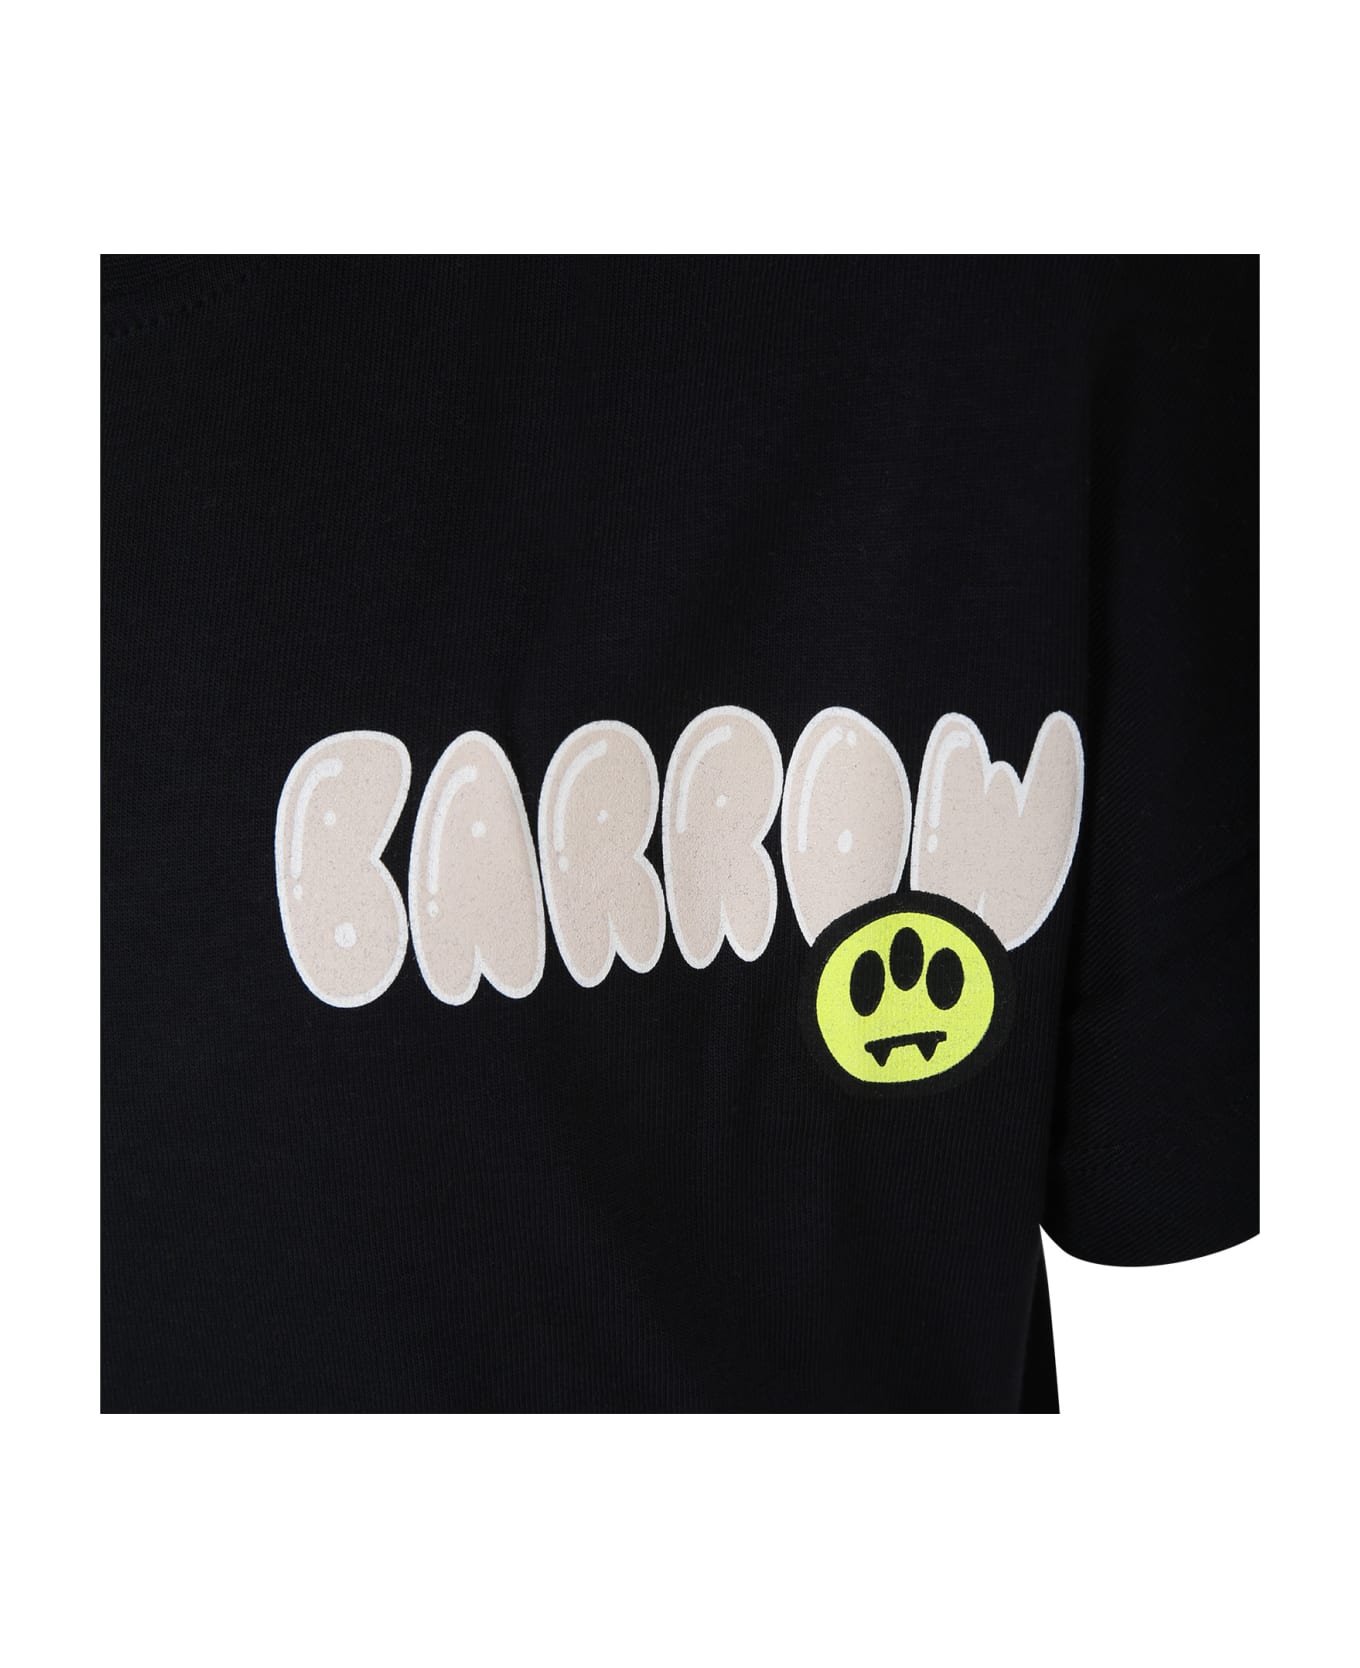 Barrow Black T-shirt For Kids With Logo And Bear - Nero/Black